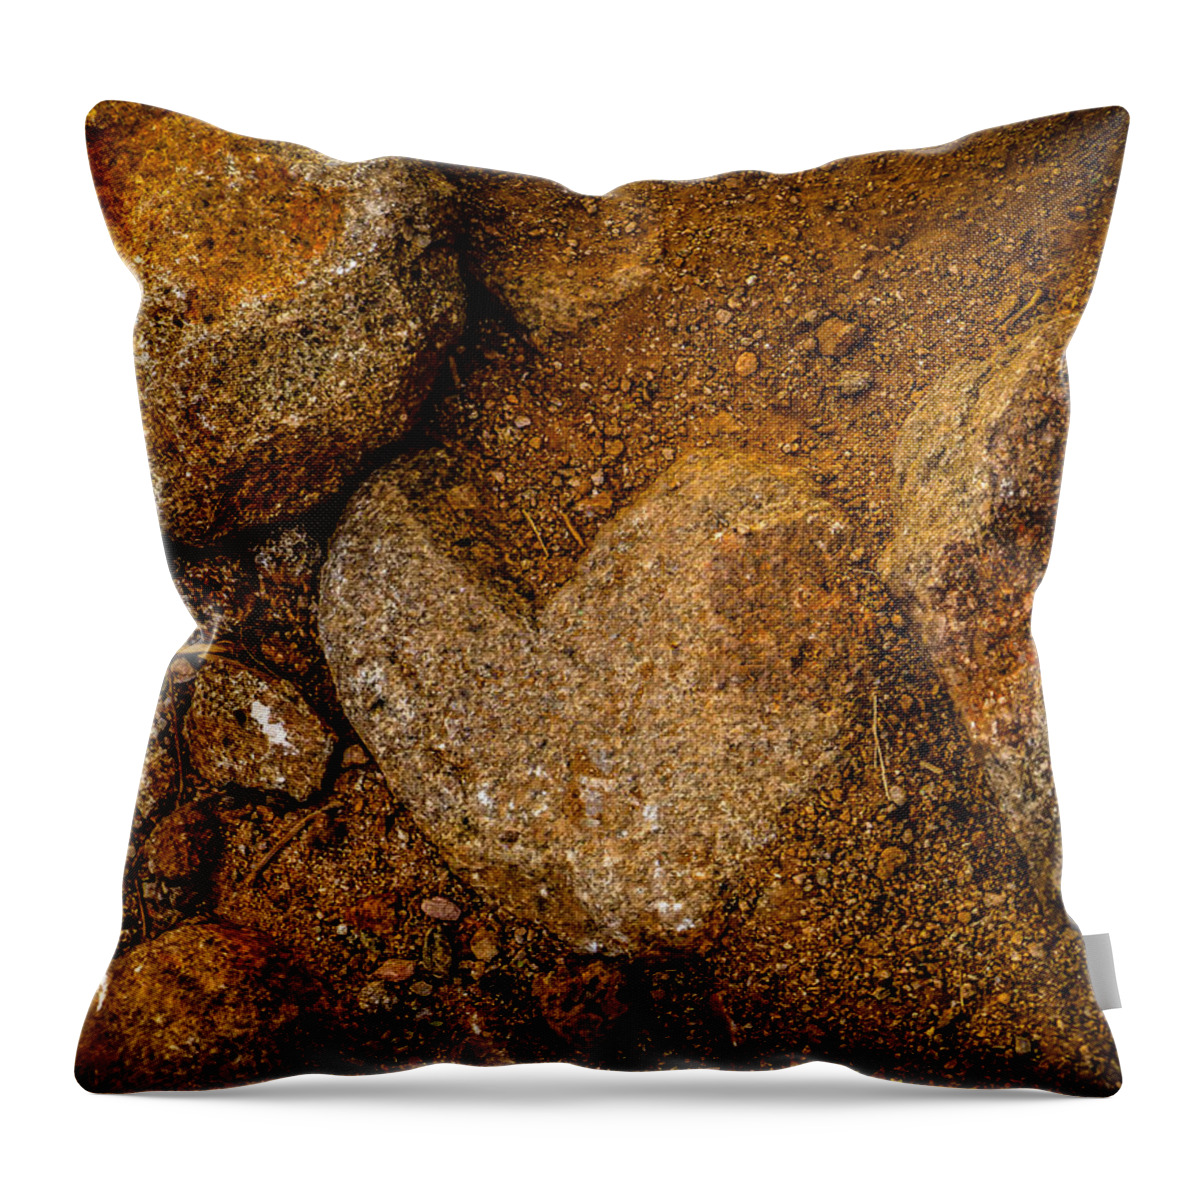 Rock Throw Pillow featuring the photograph Gold Nugget Heart by Pamela Newcomb